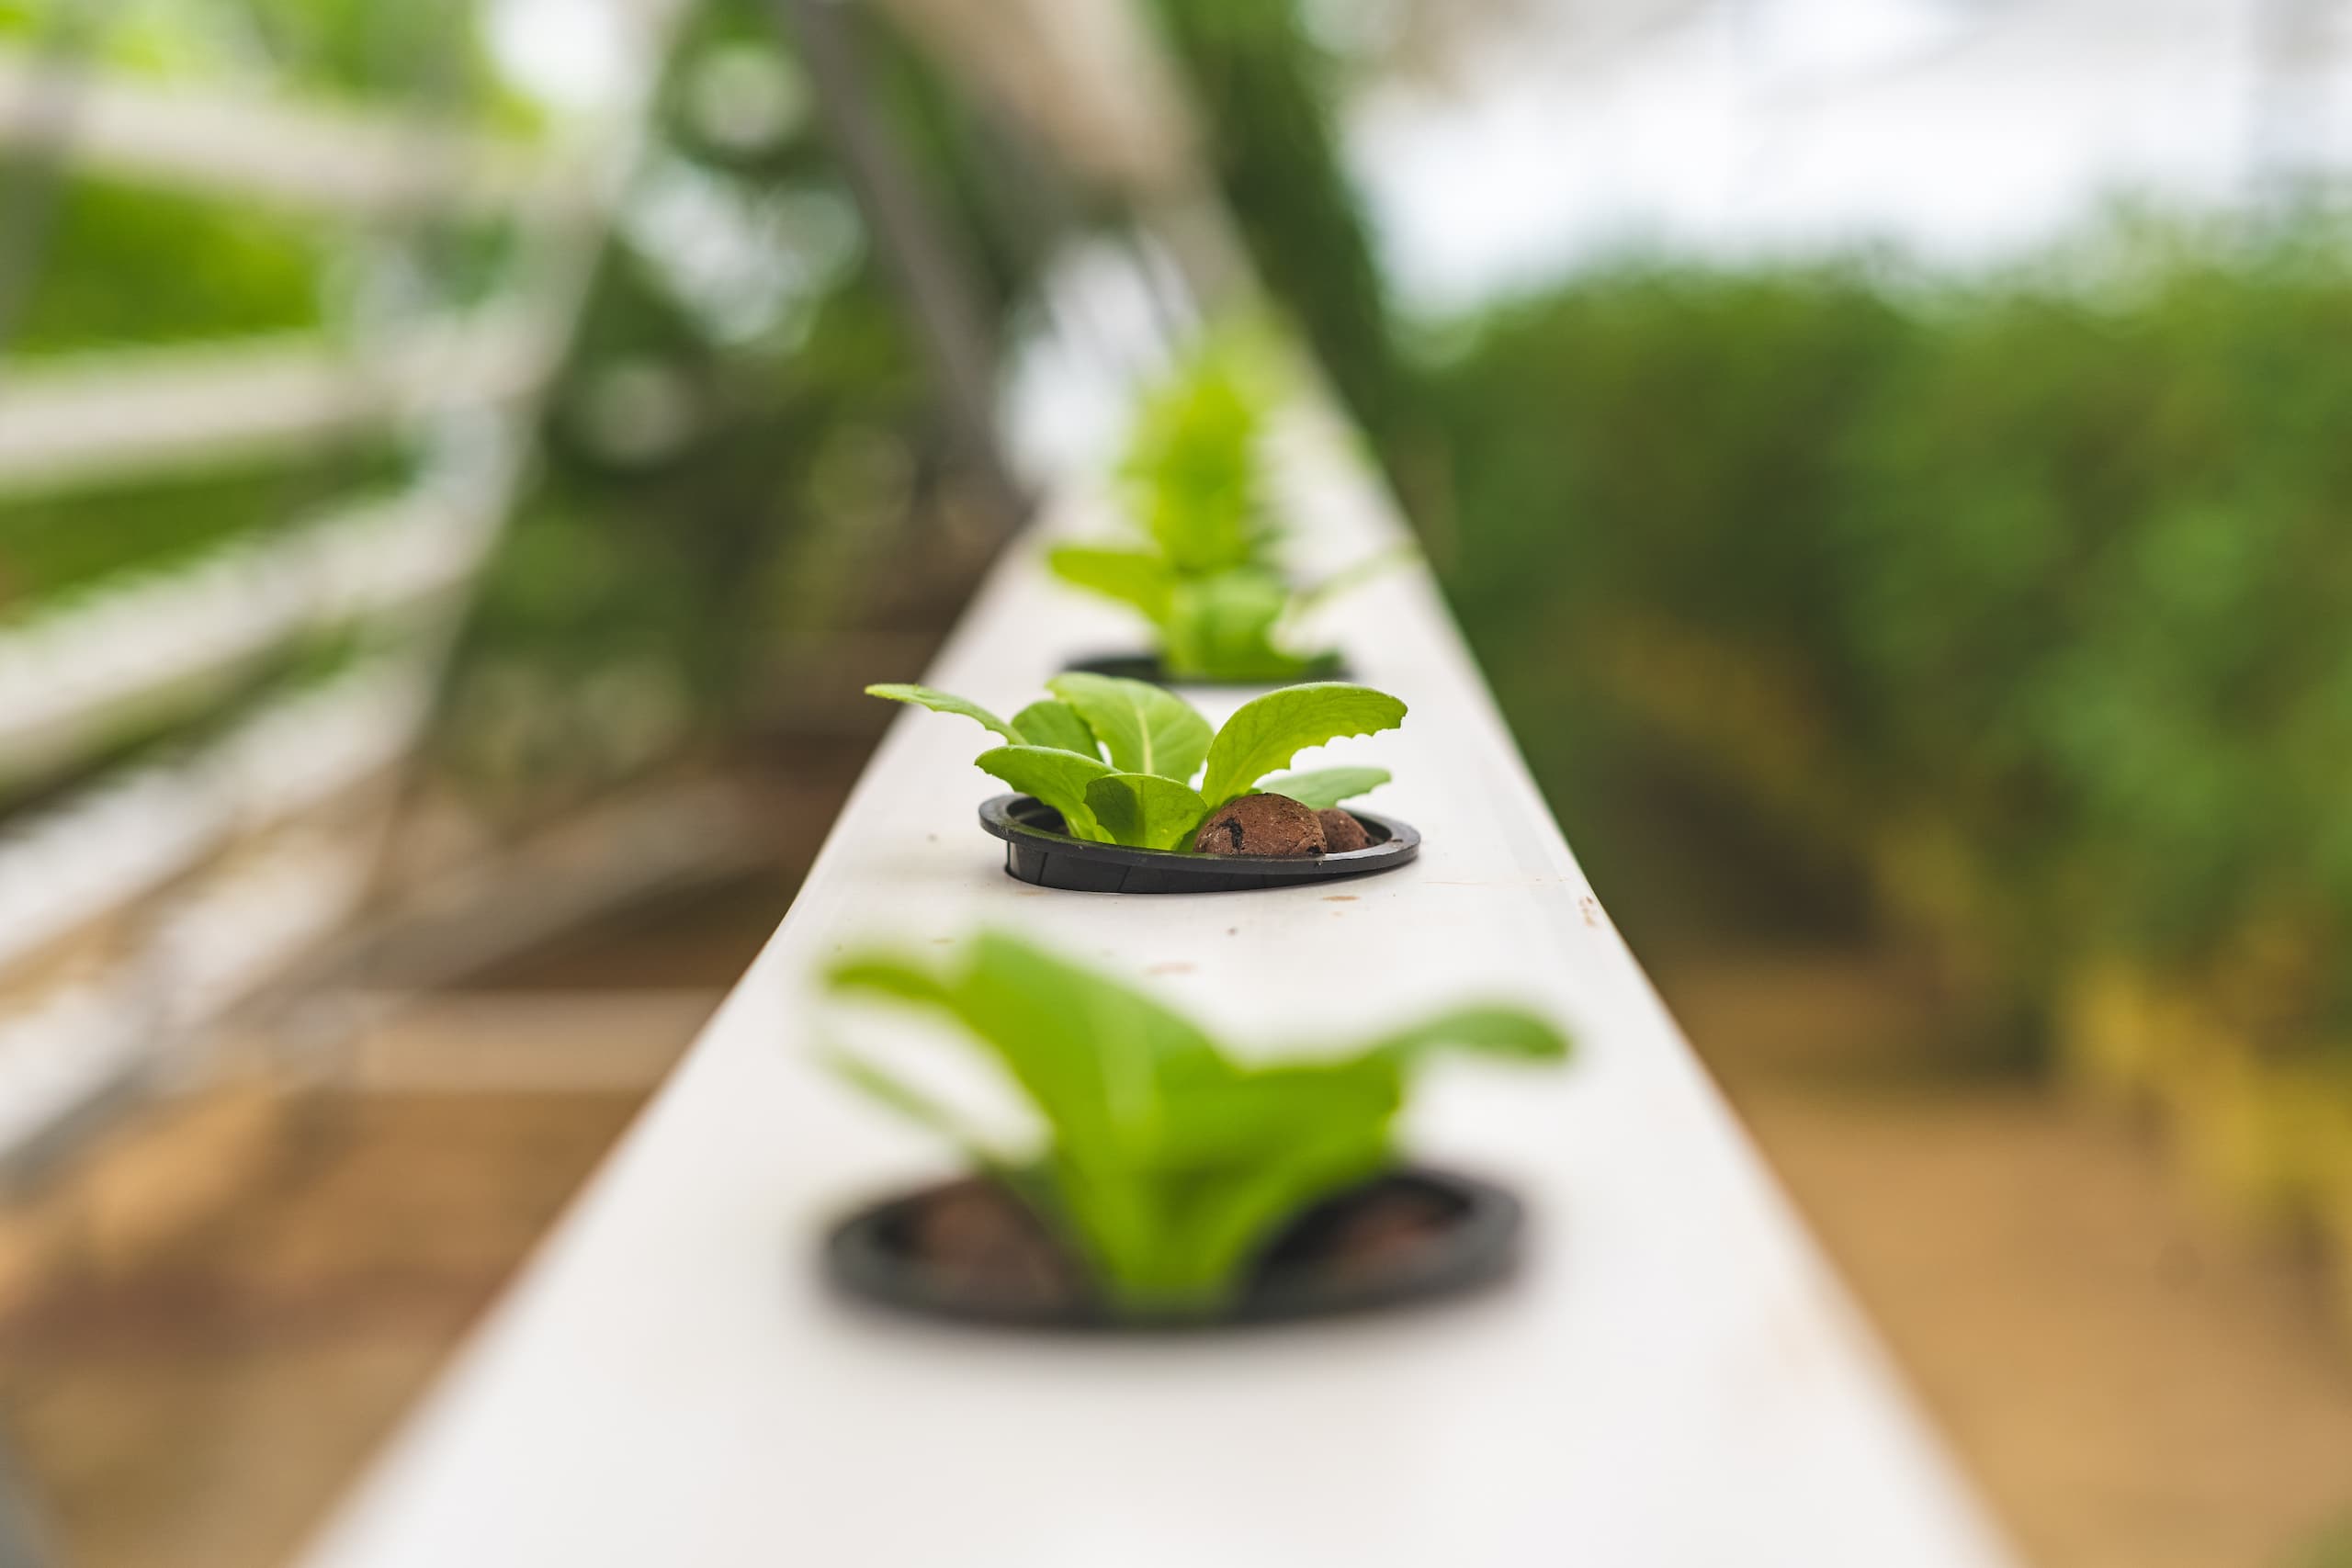 5 Easy Ways to Build a Hydroponic Grow System